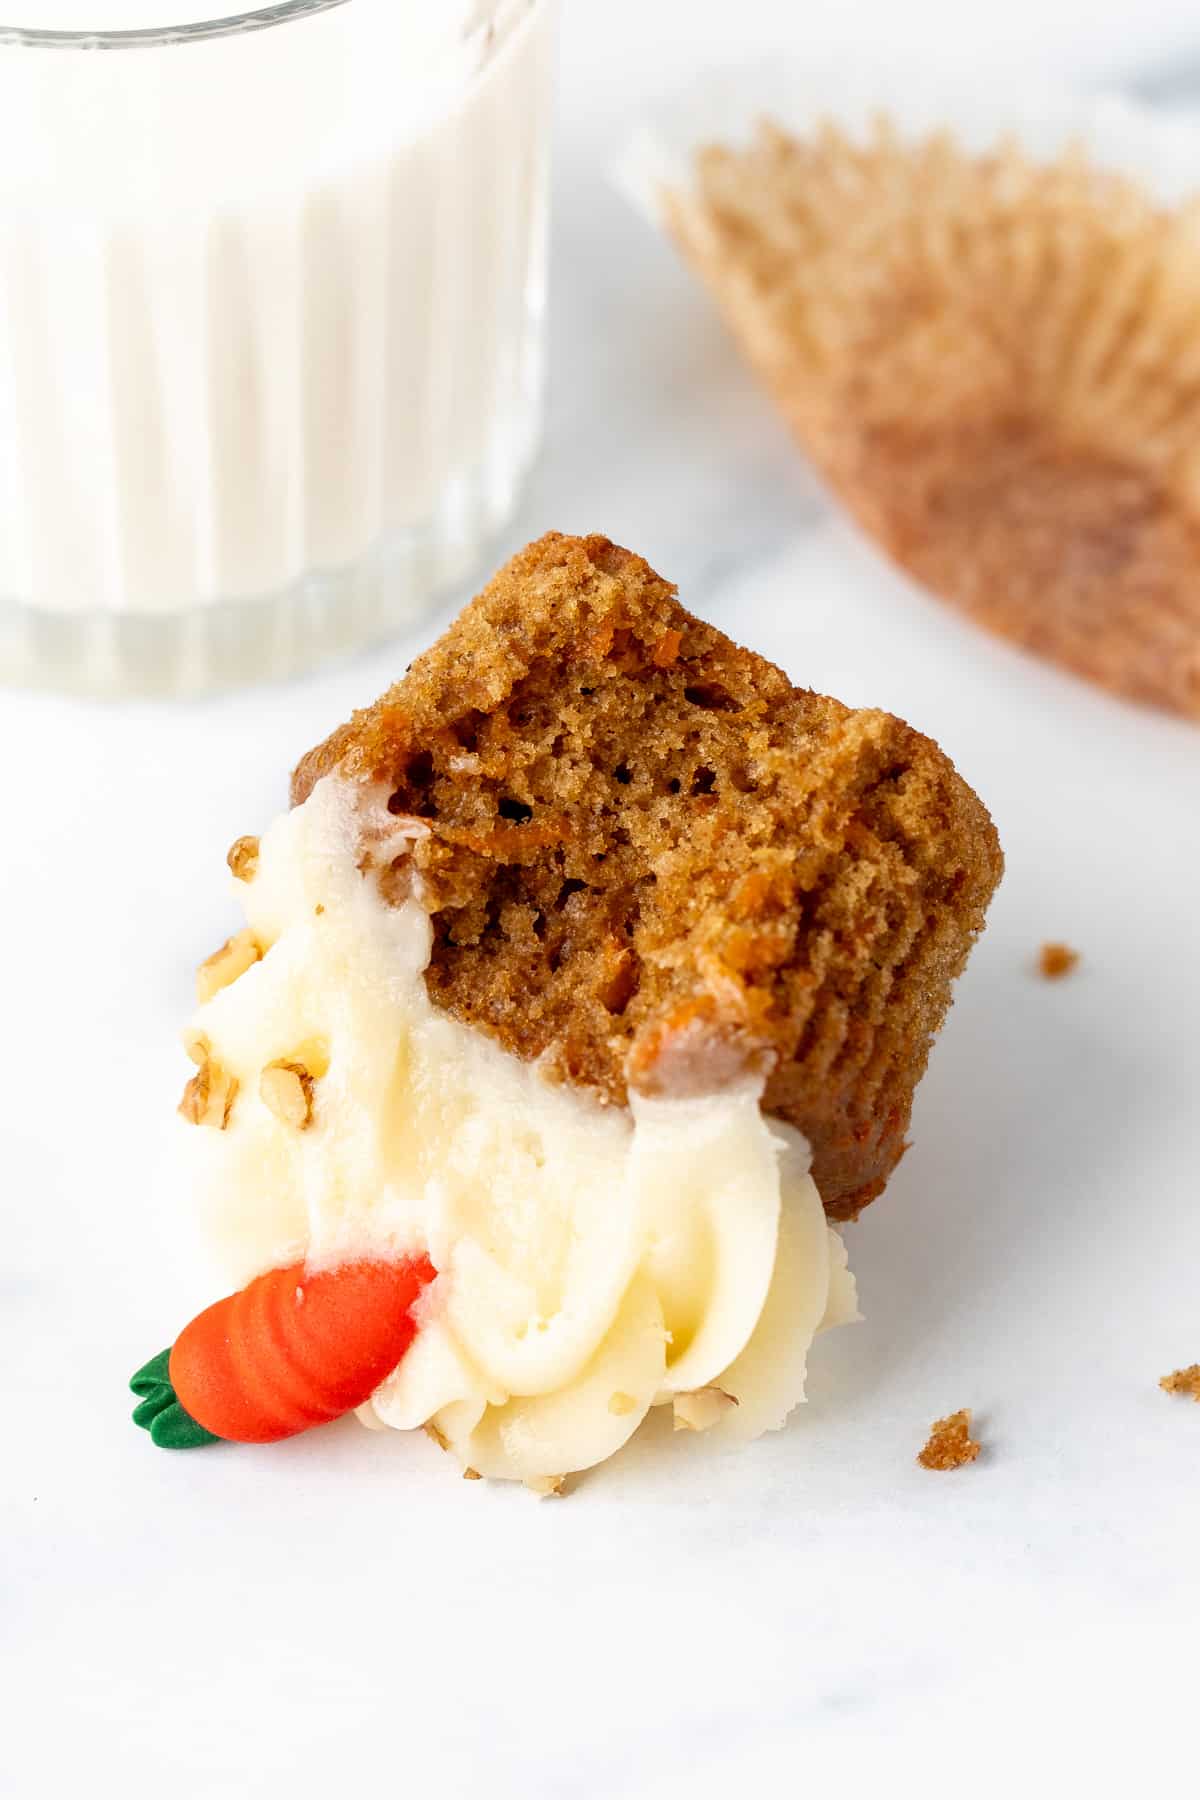 Carrot cake cupcake with a bite taken out, on its side with glass of milk